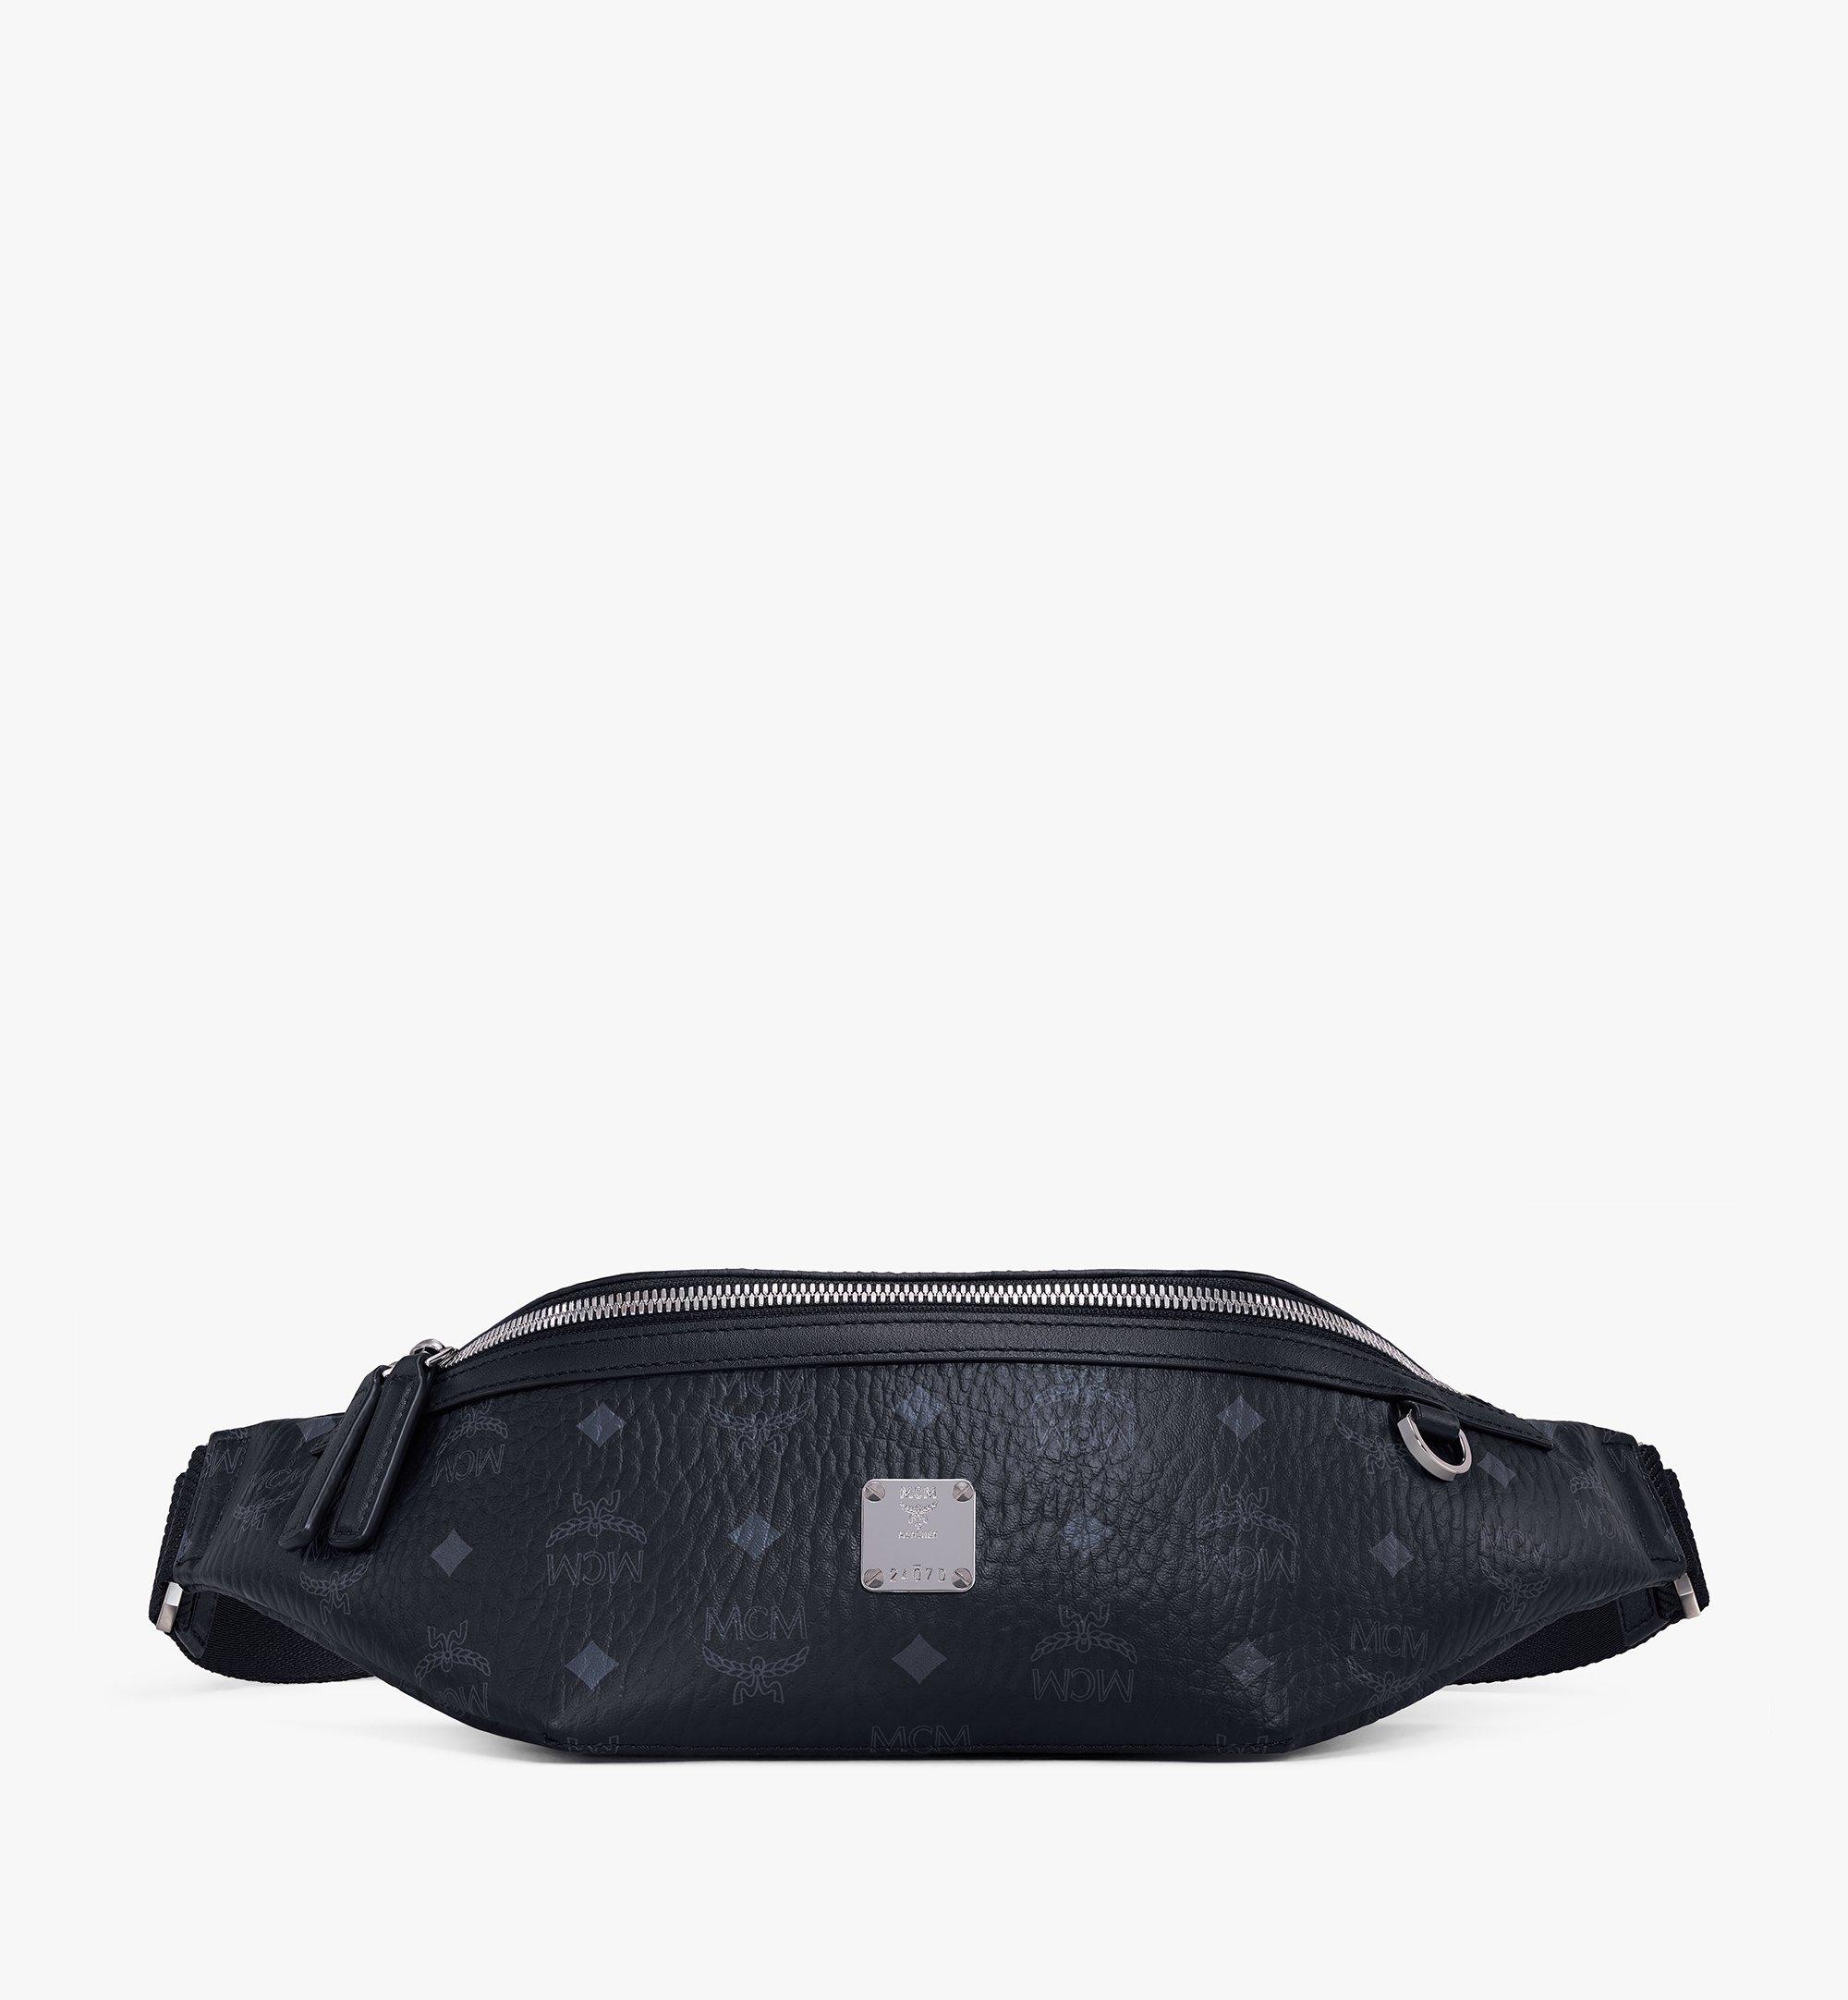 LV bumbag for men, Men's Fashion, Bags, Belt bags, Clutches and